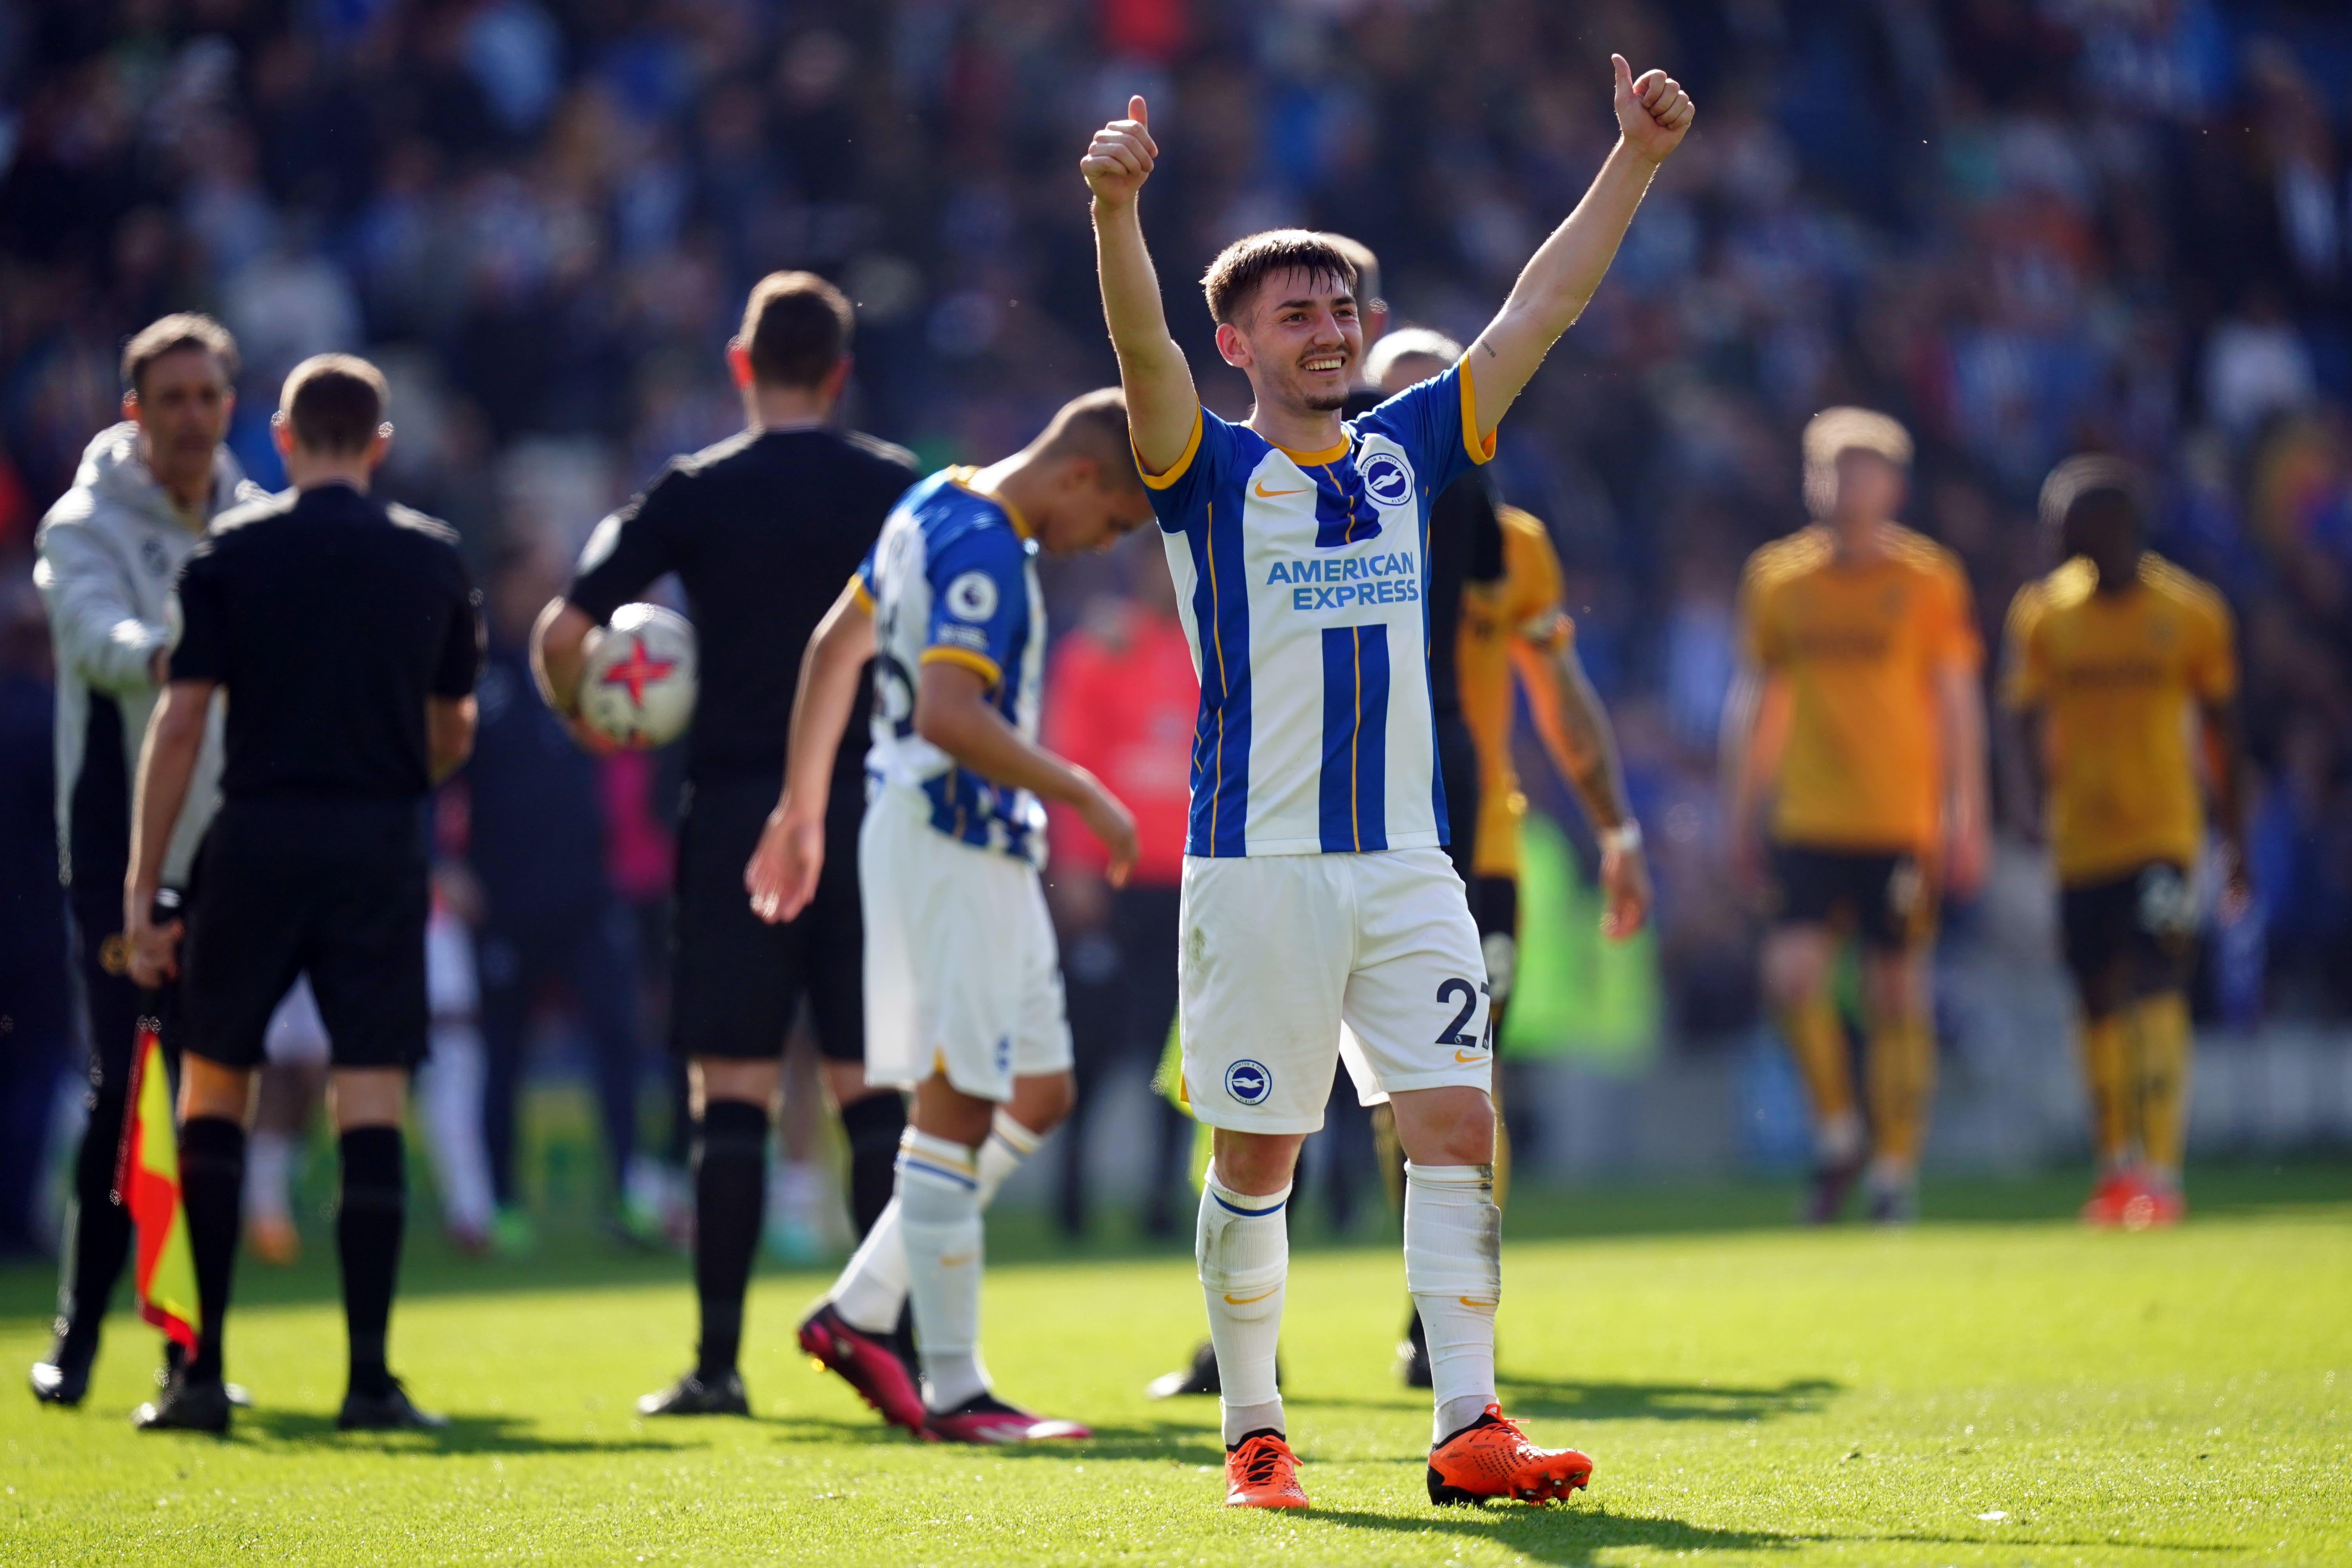 “It’s had a negative effect on my performance and professional life,” Brighton’s Billy Gilmour said